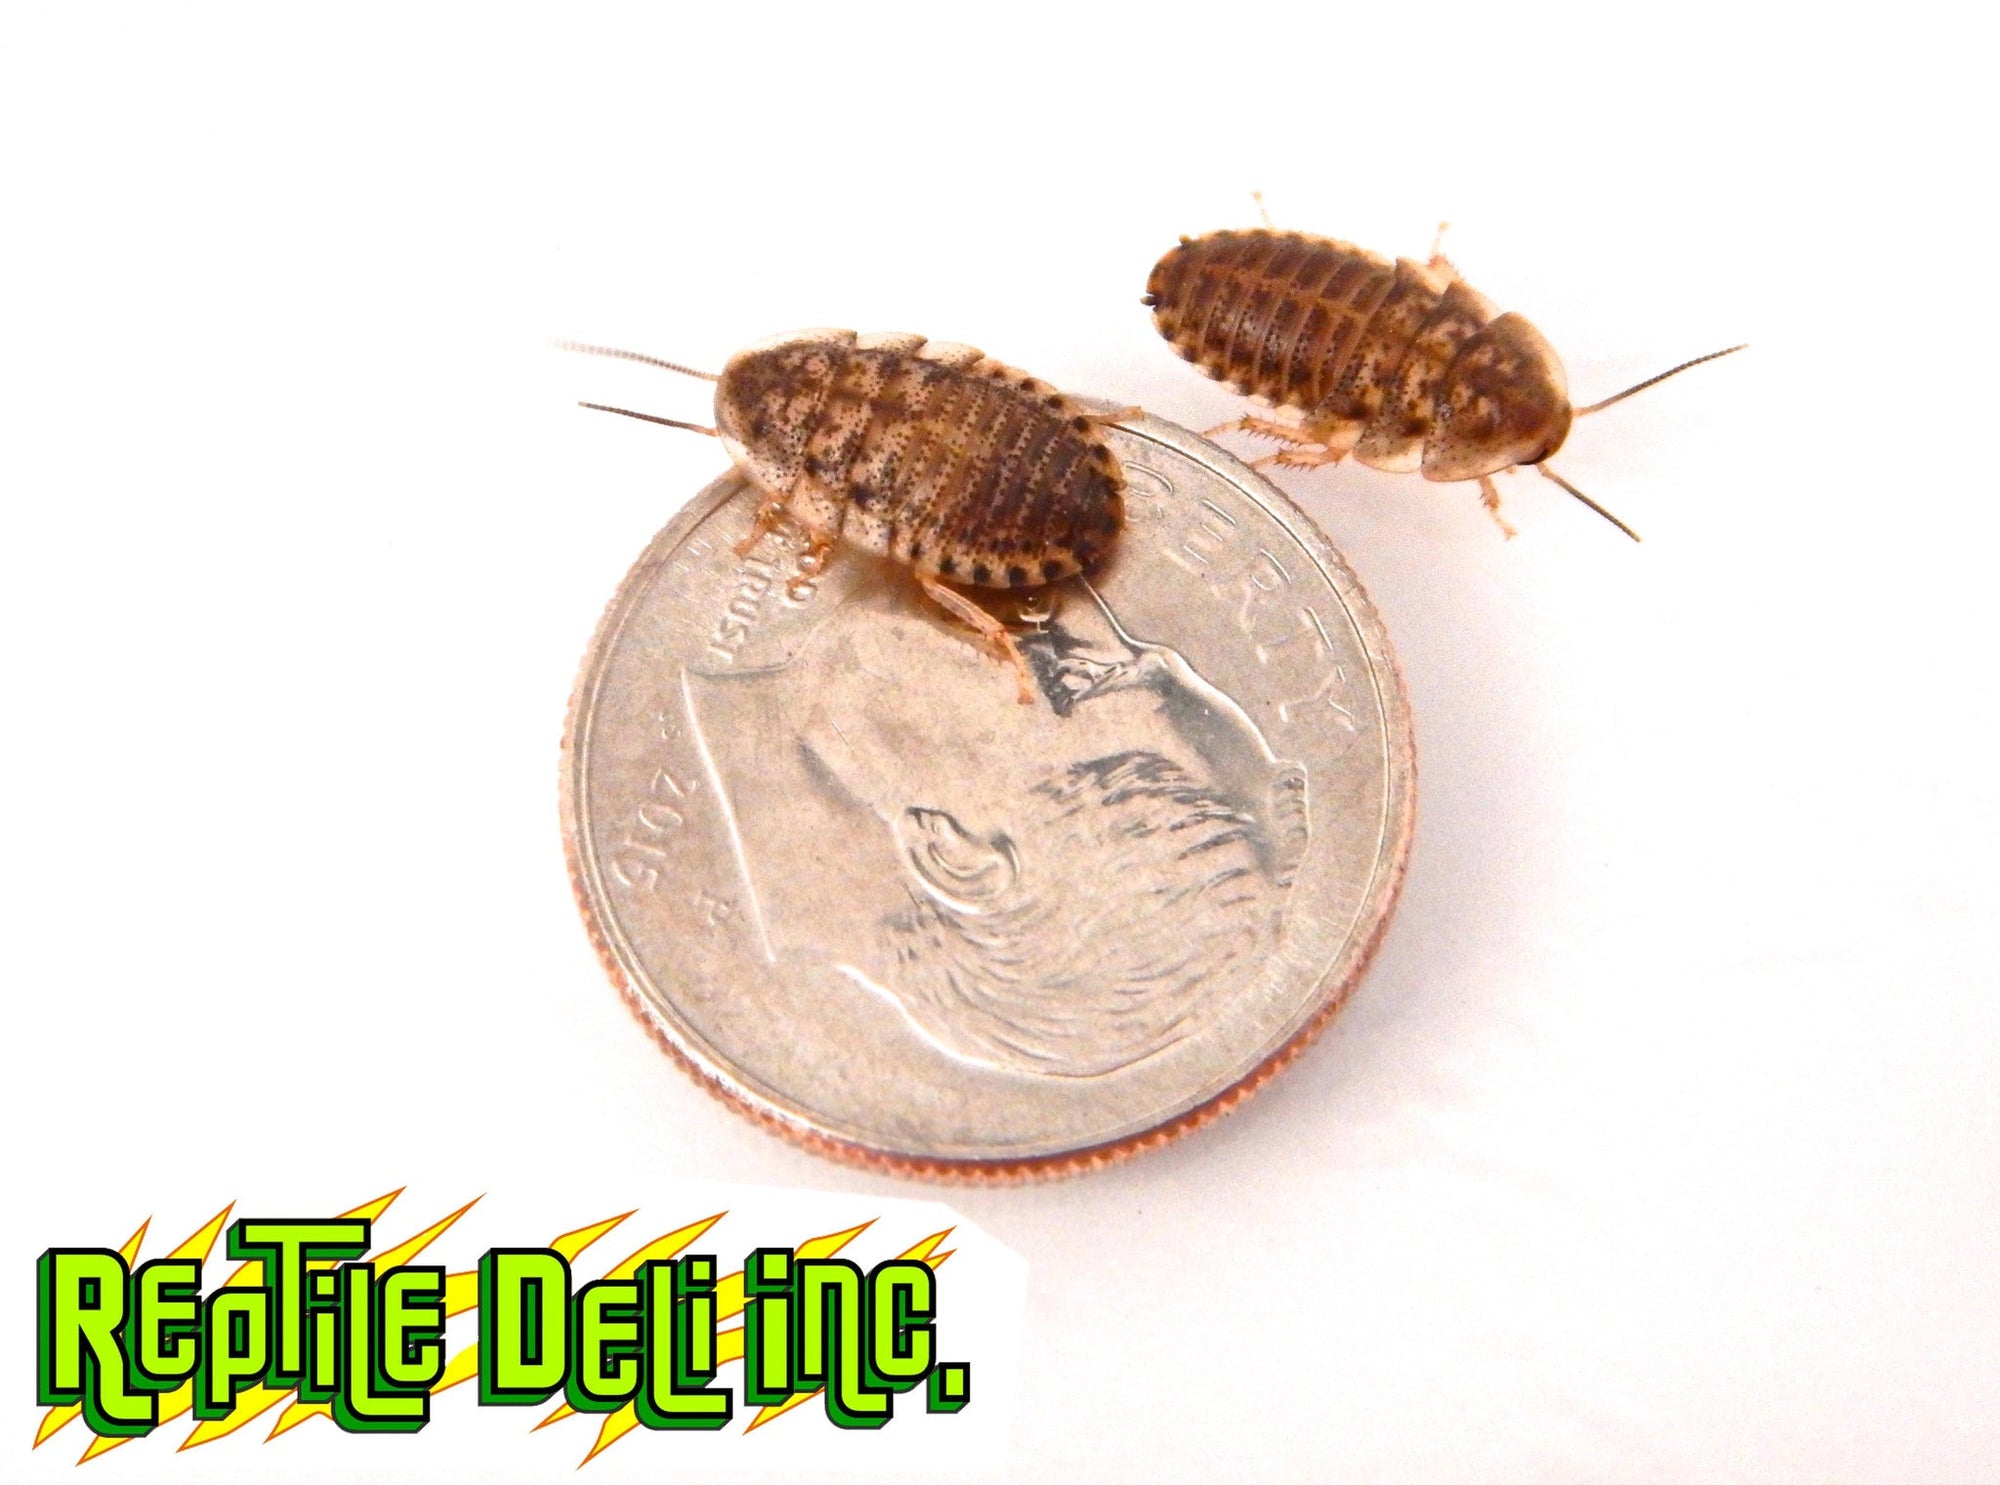 Why are Dubia Roaches the most beneficial feeder insect?